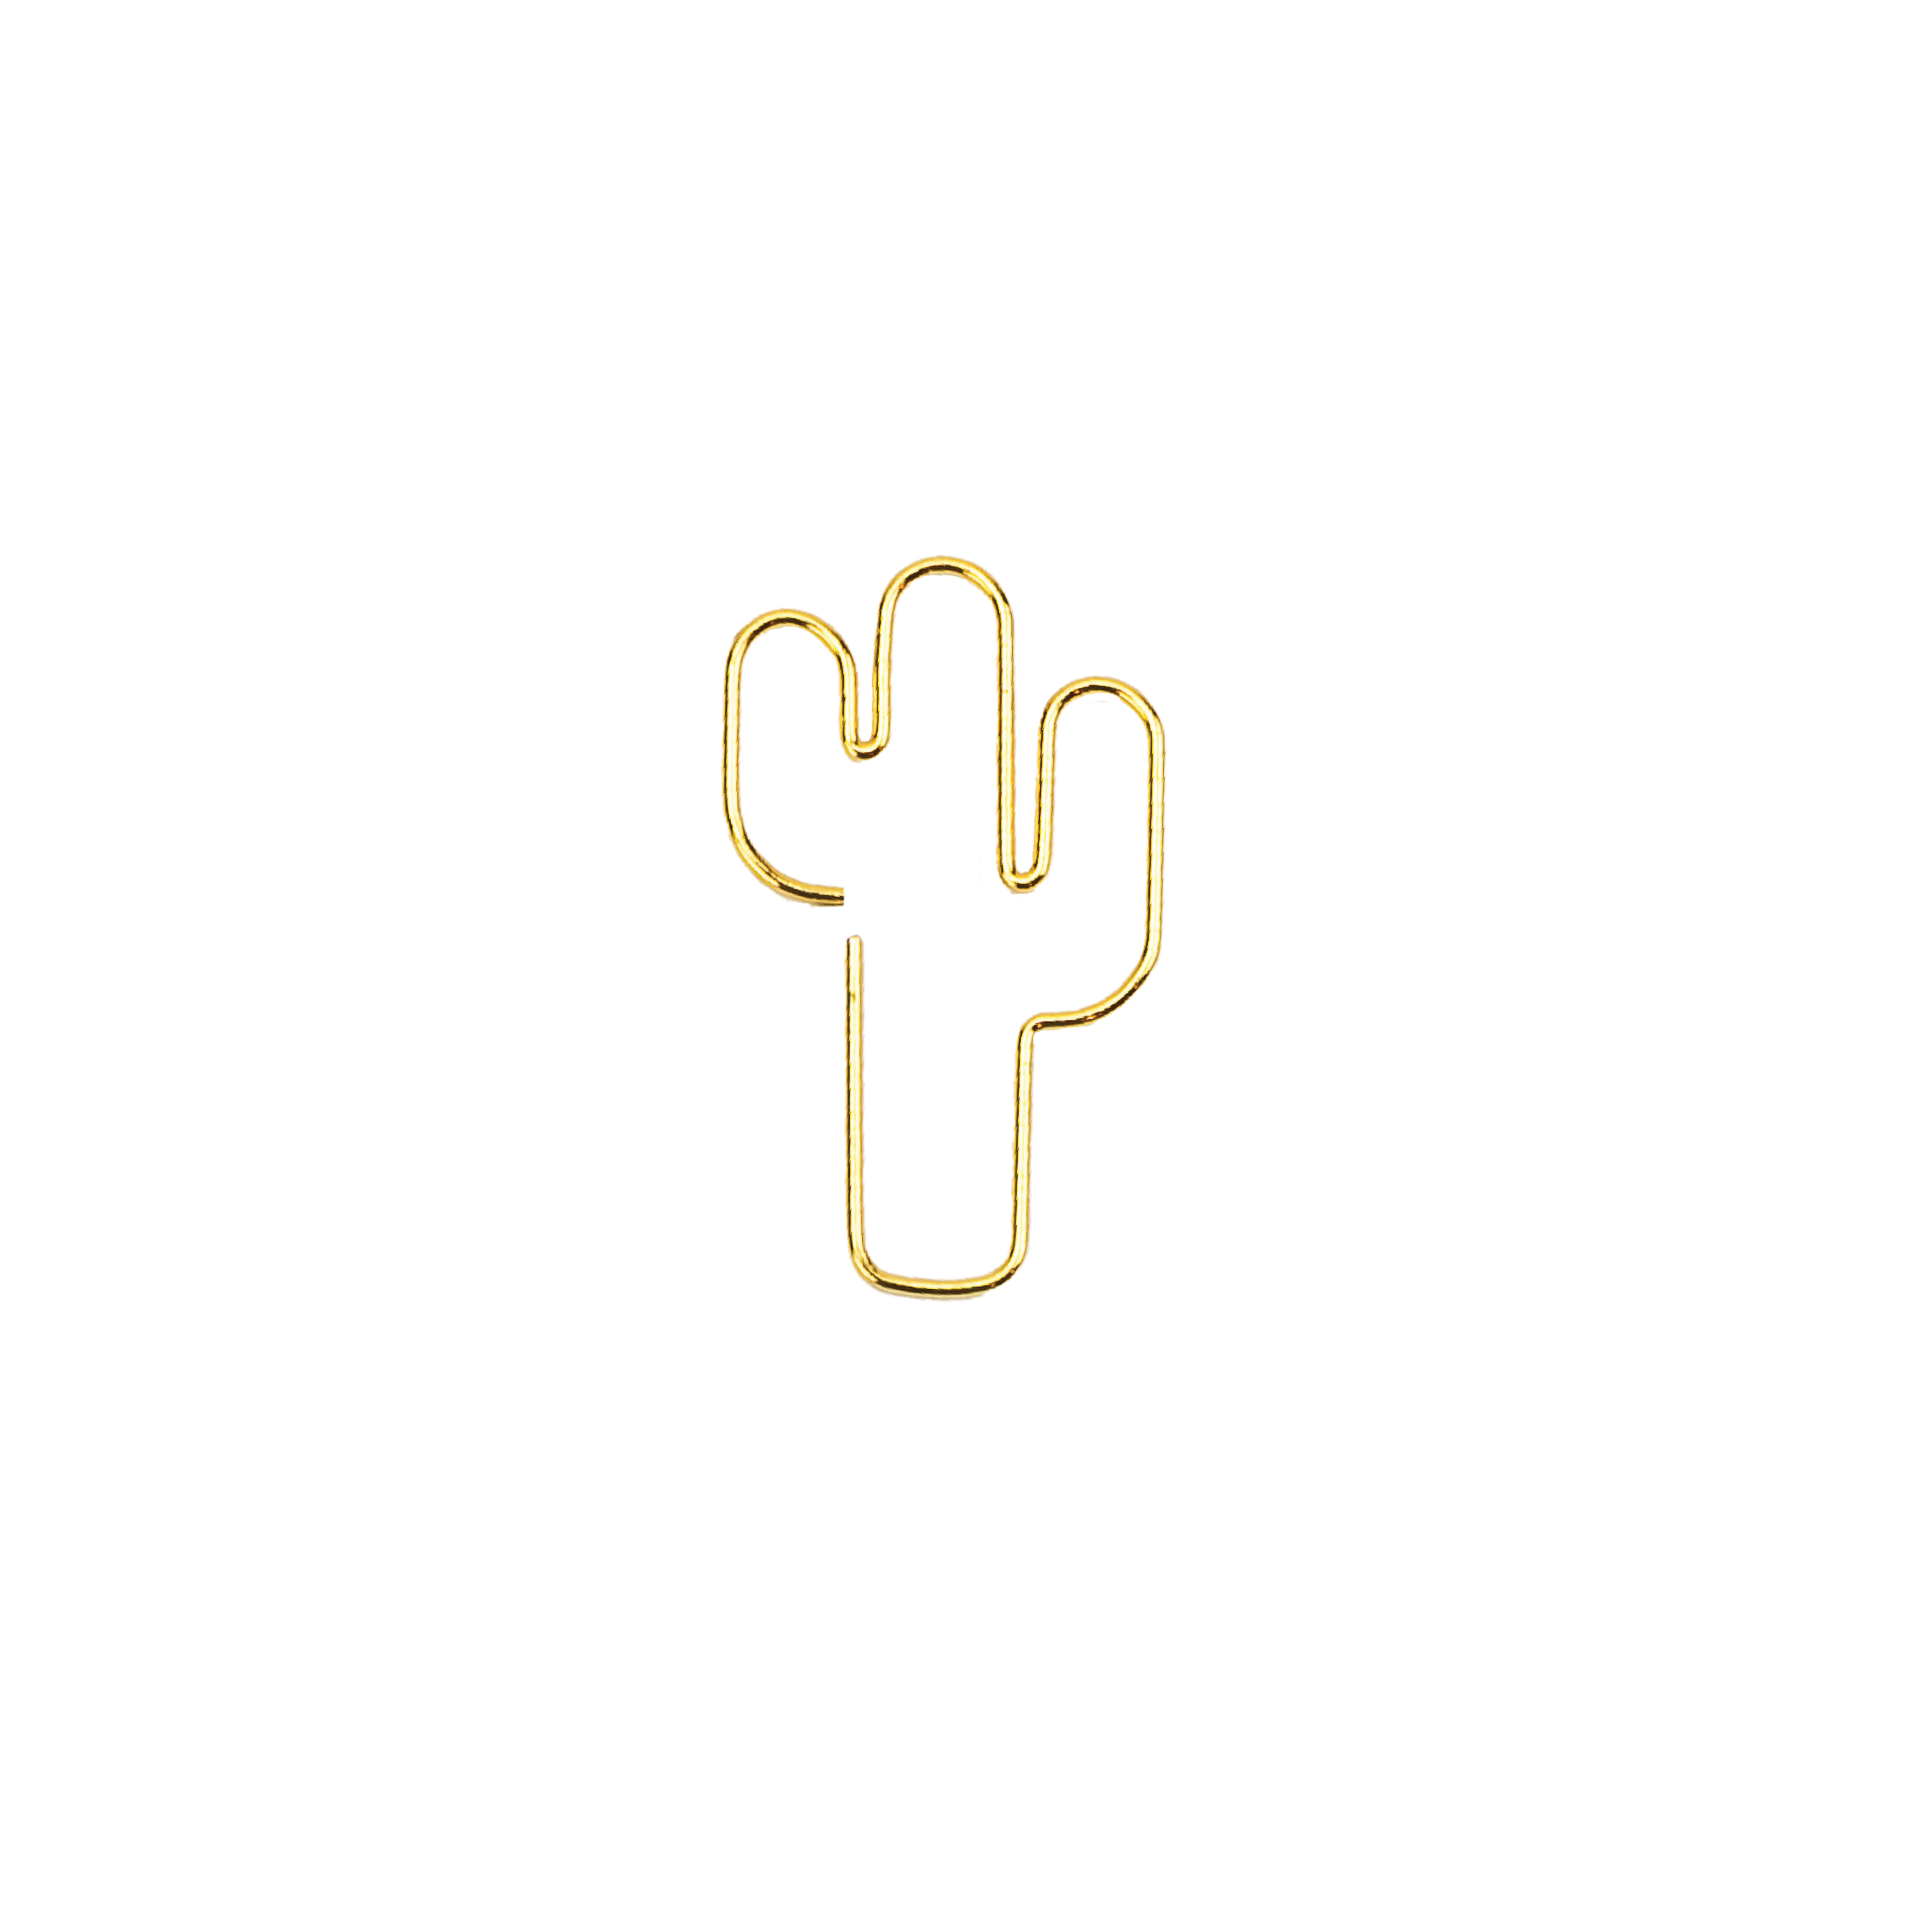 Cactus - 25 Gold Paperclips